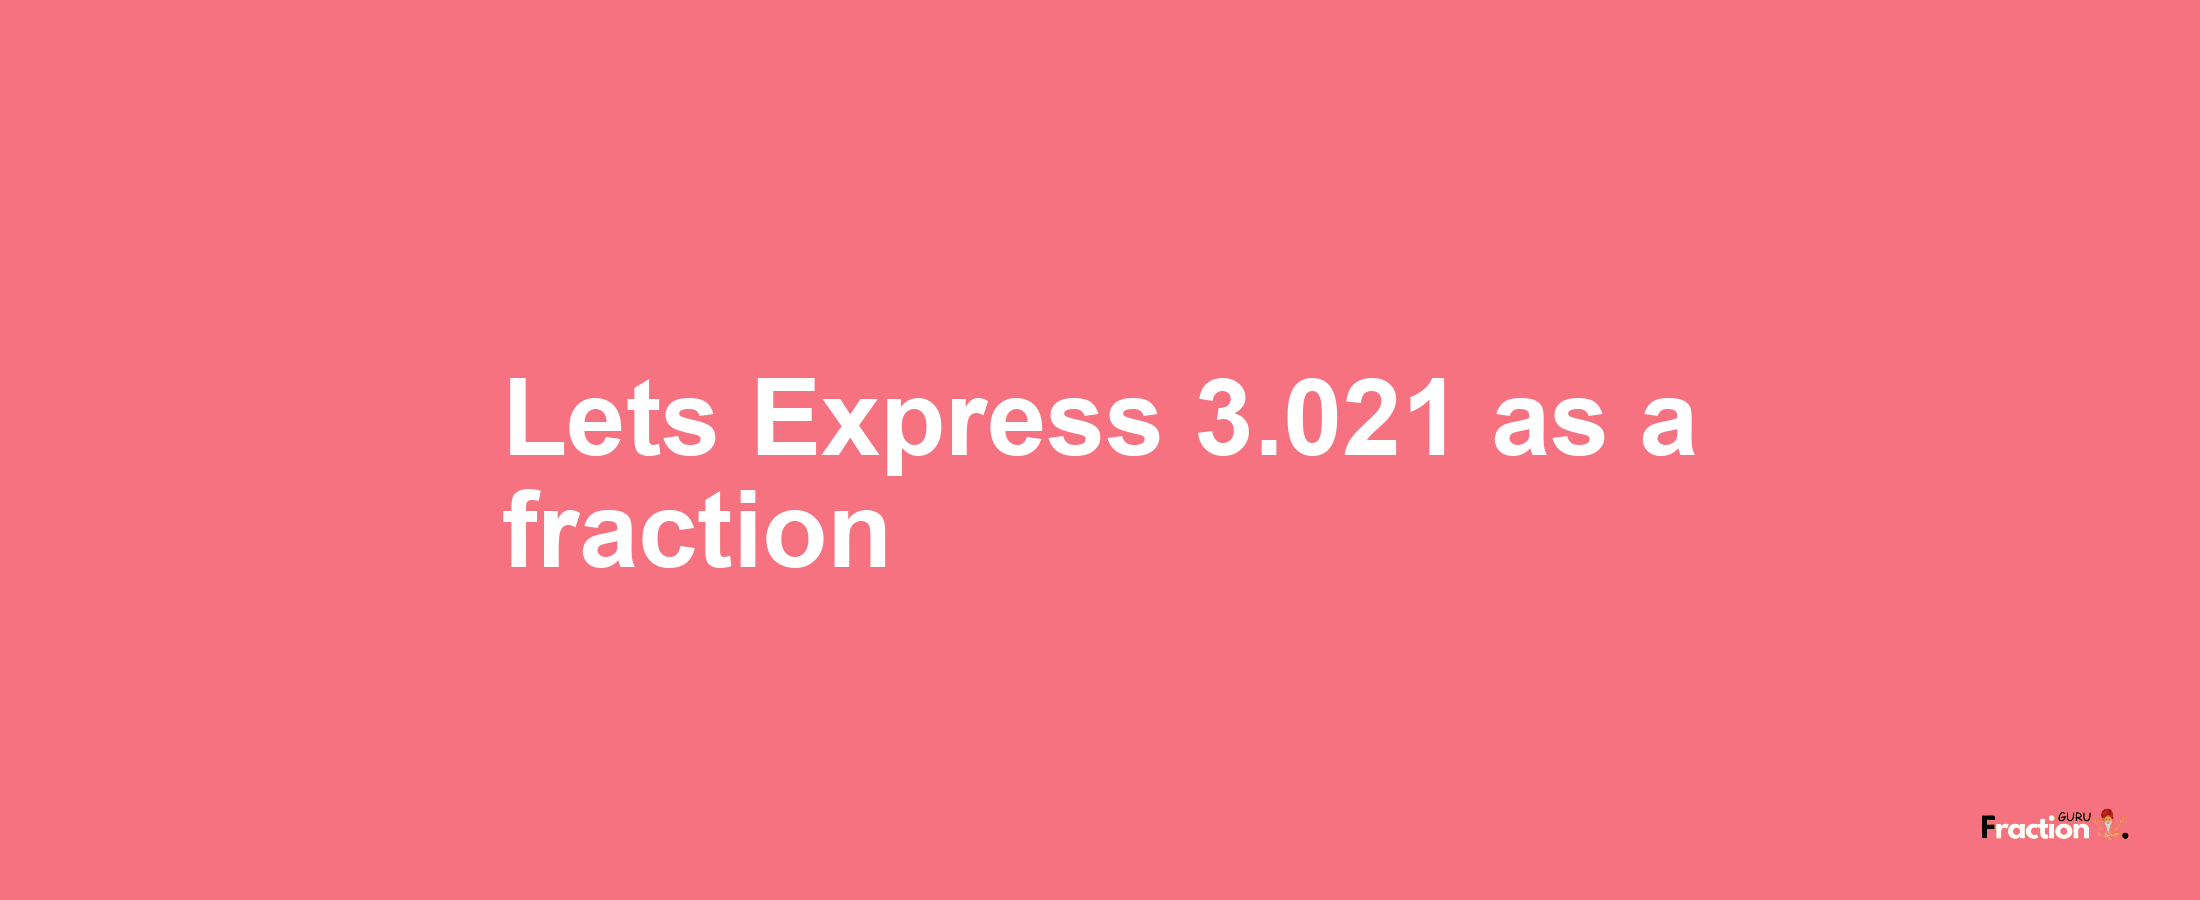 Lets Express 3.021 as afraction